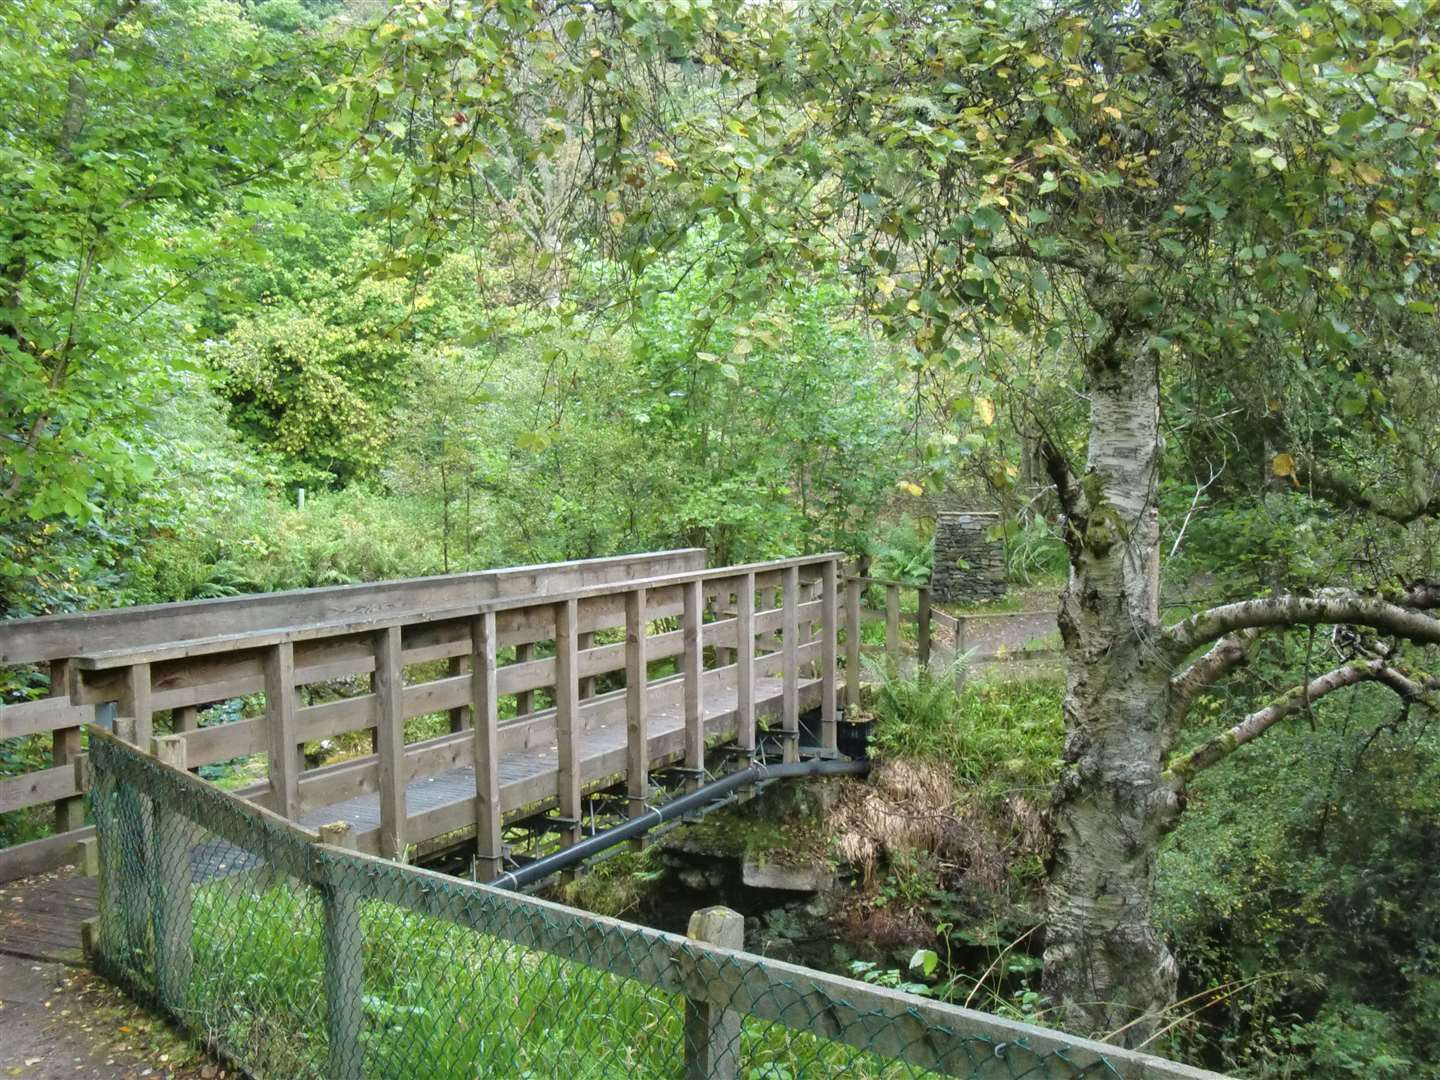 This bridge spans the Gynack Burn at the start of the walk.